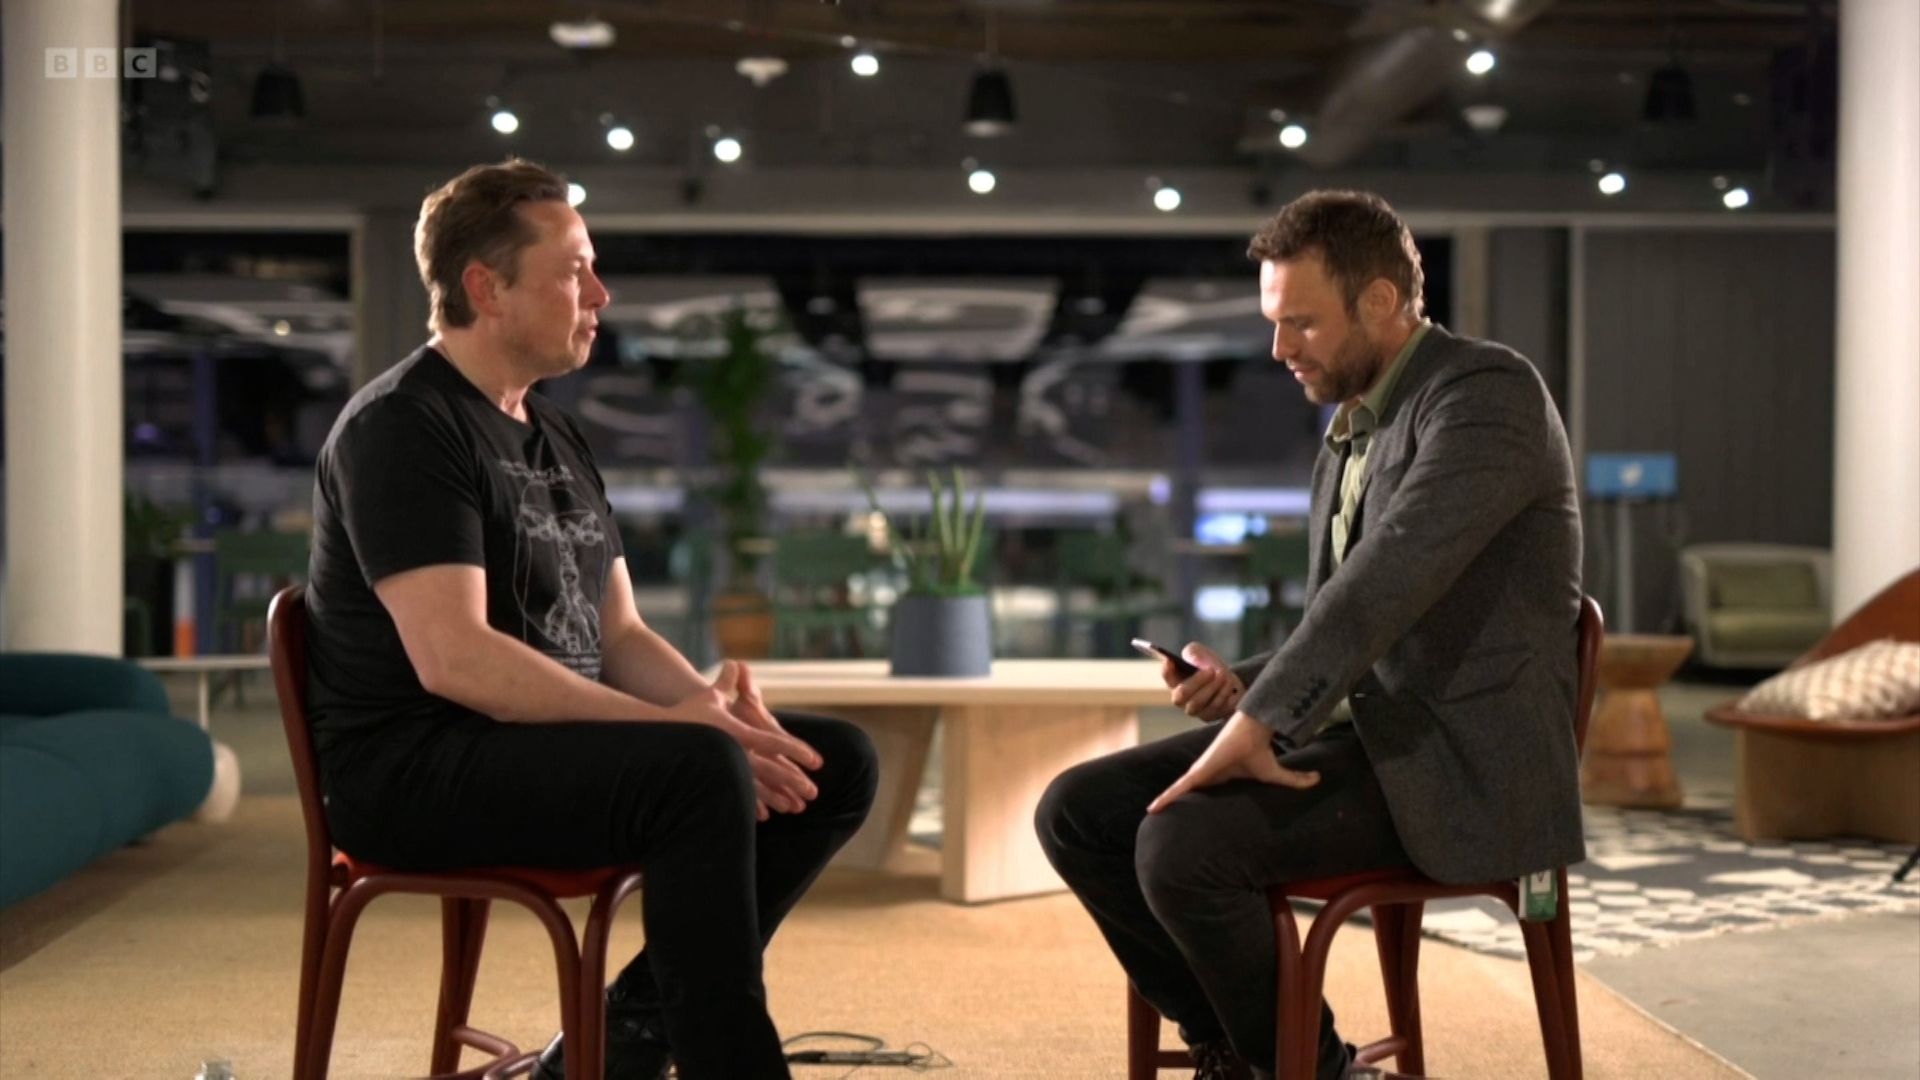 Elon Musk talks about his experience of running Twitter even with a mass layoff for the platform in an interview with the BBC | What's Trending